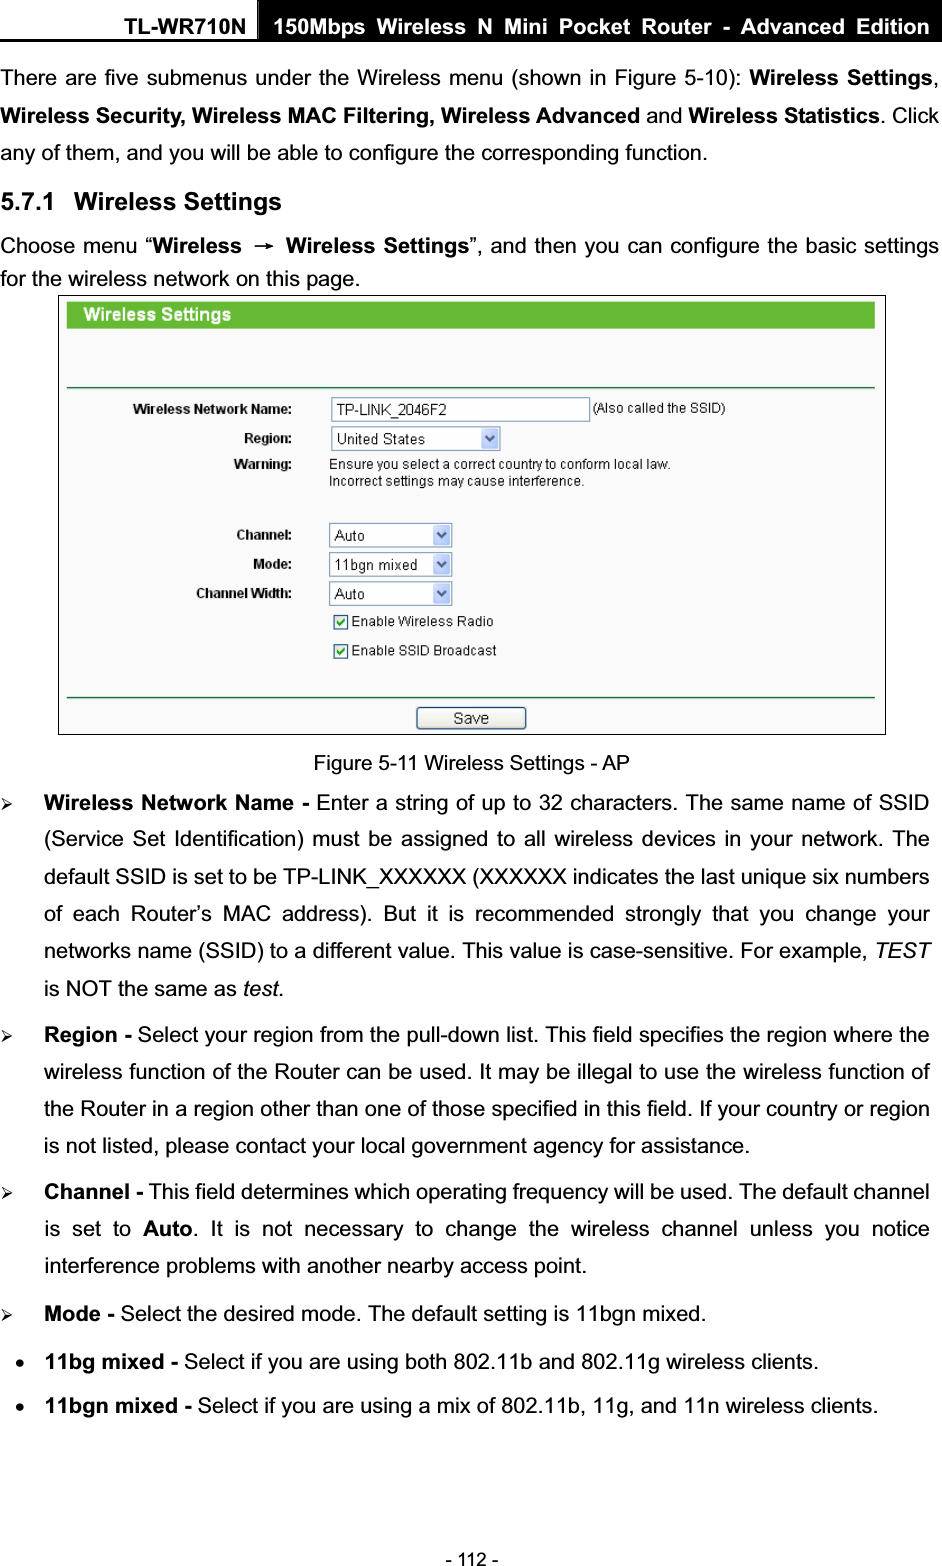 TL-WR710N  150Mbps Wireless N Mini Pocket Router - Advanced Edition- 112 - There are five submenus under the Wireless menu (shown in Figure 5-10): Wireless Settings,Wireless Security, Wireless MAC Filtering, Wireless Advanced and Wireless Statistics. Clickany of them, and you will be able to configure the corresponding function.   5.7.1 Wireless Settings Choose menu “Wireless ė Wireless Settings”, and then you can configure the basic settings for the wireless network on this page. Figure 5-11 Wireless Settings - AP ¾Wireless Network Name - Enter a string of up to 32 characters. The same name of SSID (Service Set Identification) must be assigned to all wireless devices in your network. The default SSID is set to be TP-LINK_XXXXXX (XXXXXX indicates the last unique six numbers of each Router’s MAC address). But it is recommended strongly that you change your networks name (SSID) to a different value. This value is case-sensitive. For example, TESTis NOT the same as test.¾Region - Select your region from the pull-down list. This field specifies the region where the wireless function of the Router can be used. It may be illegal to use the wireless function of the Router in a region other than one of those specified in this field. If your country or region is not listed, please contact your local government agency for assistance. ¾Channel - This field determines which operating frequency will be used. The default channel is set to Auto. It is not necessary to change the wireless channel unless you notice interference problems with another nearby access point. ¾Mode - Select the desired mode. The default setting is 11bgn mixed. x11bg mixed - Select if you are using both 802.11b and 802.11g wireless clients.x11bgn mixed - Select if you are using a mix of 802.11b, 11g, and 11n wireless clients. 